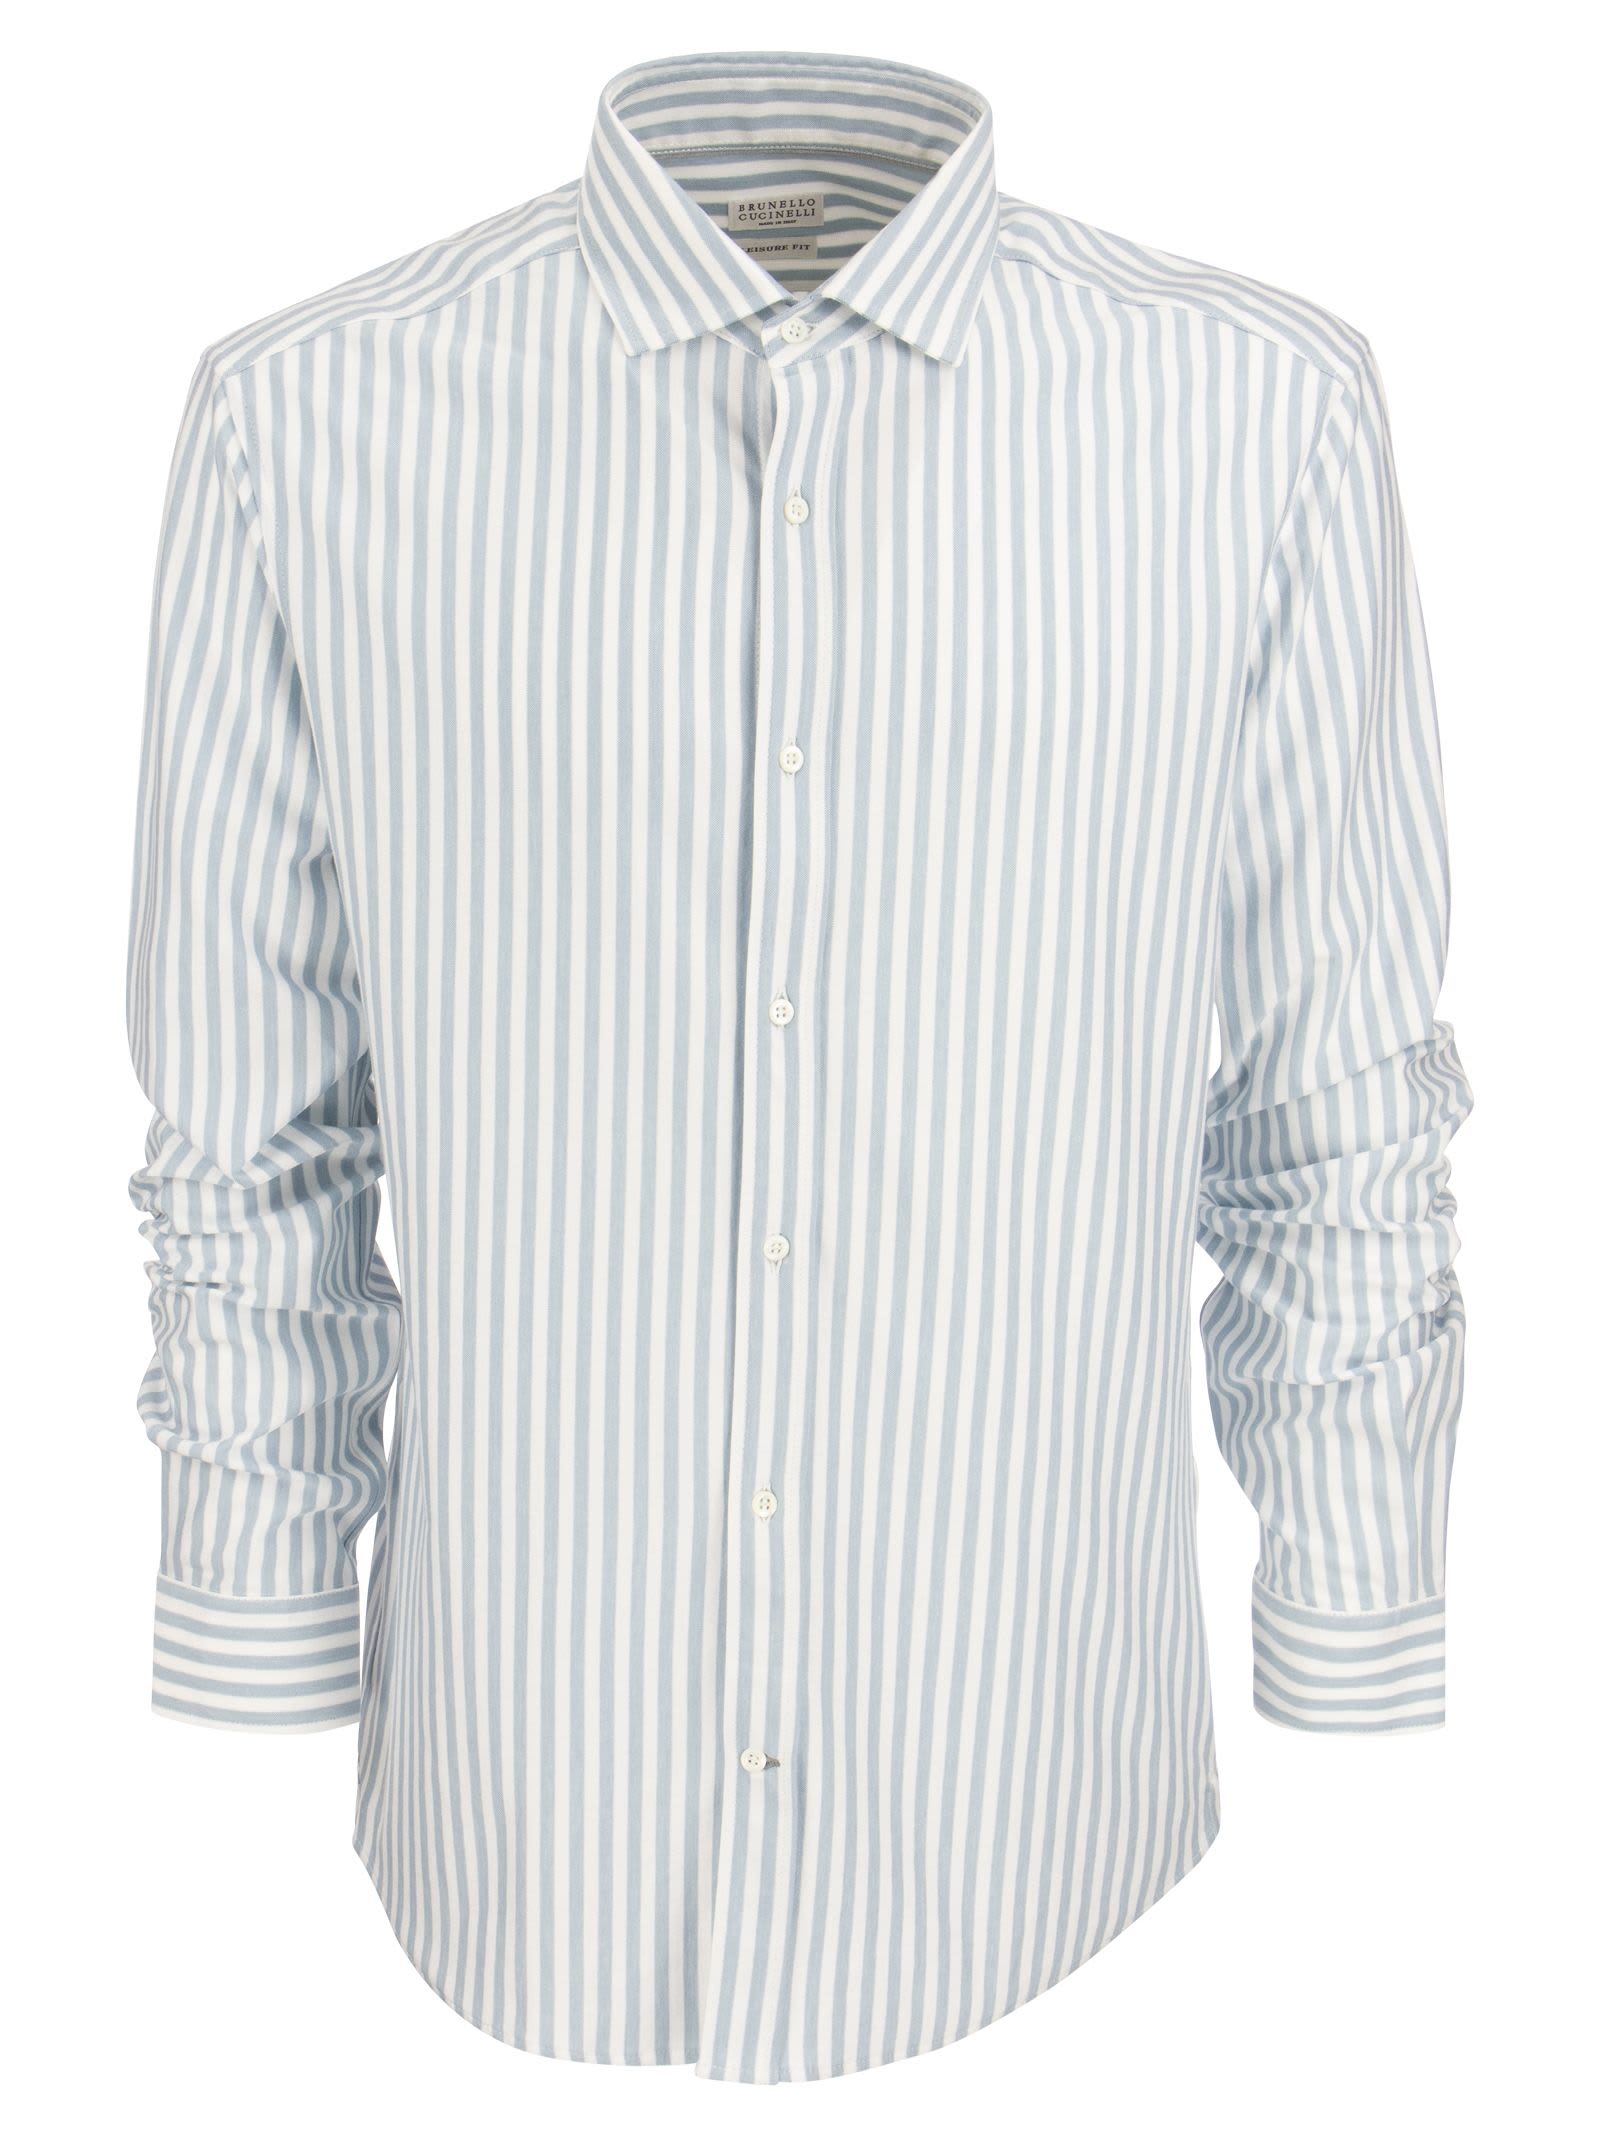 Brunello Cucinelli Slim Fit Striped Panama Shirt With French Collar